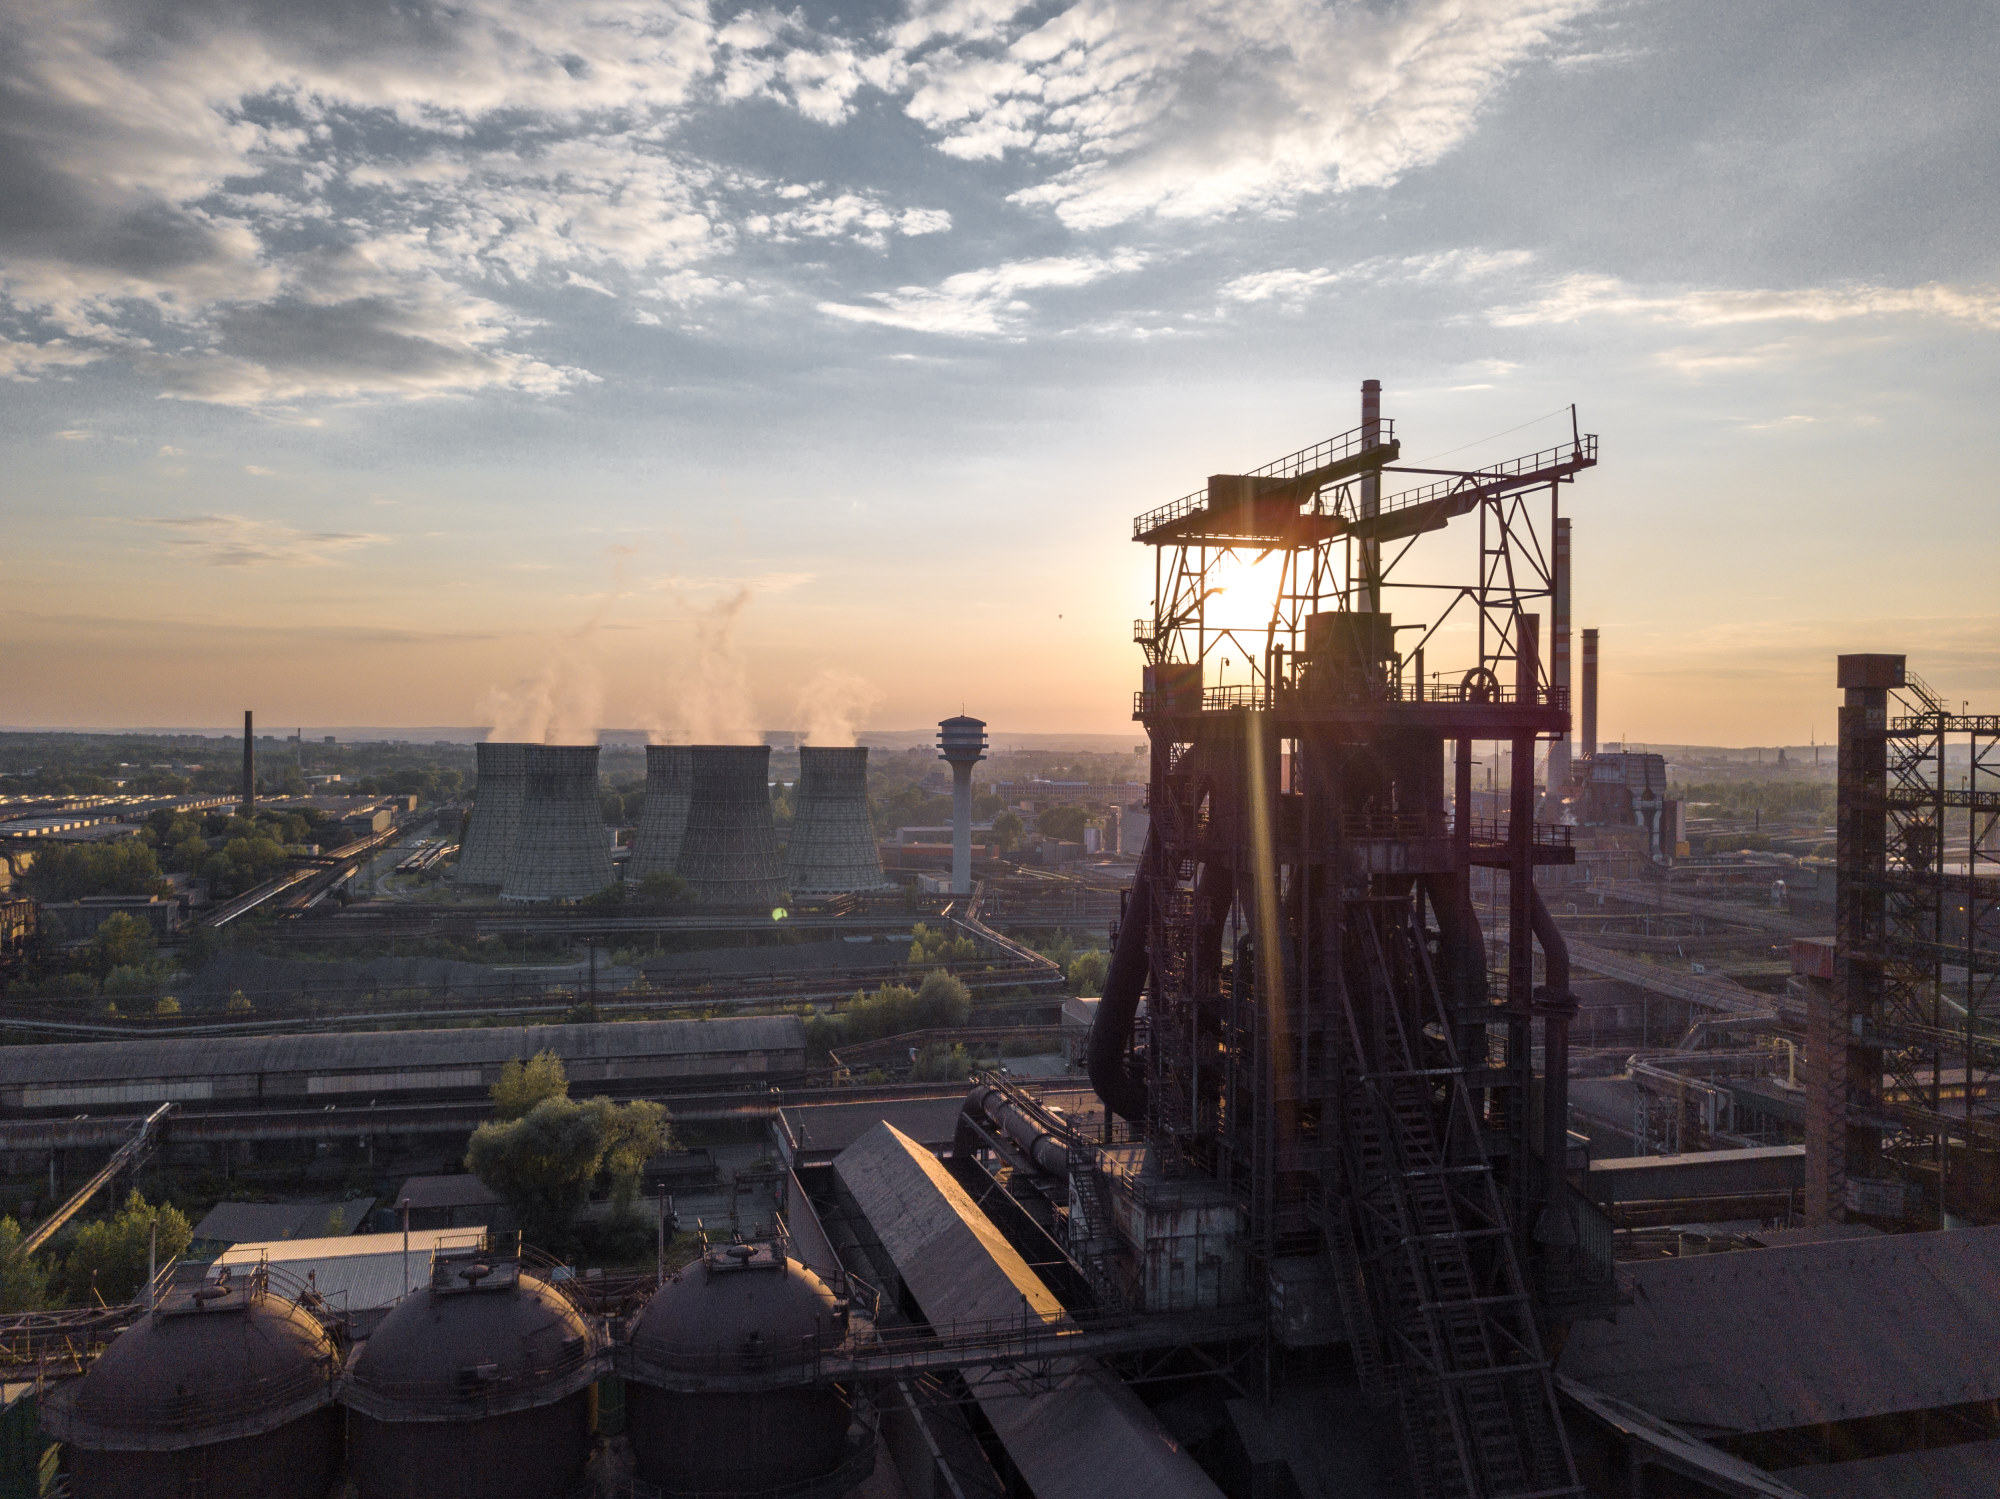 LIBERTY Ostrava breaks production and profit records  during the first quarter 2021